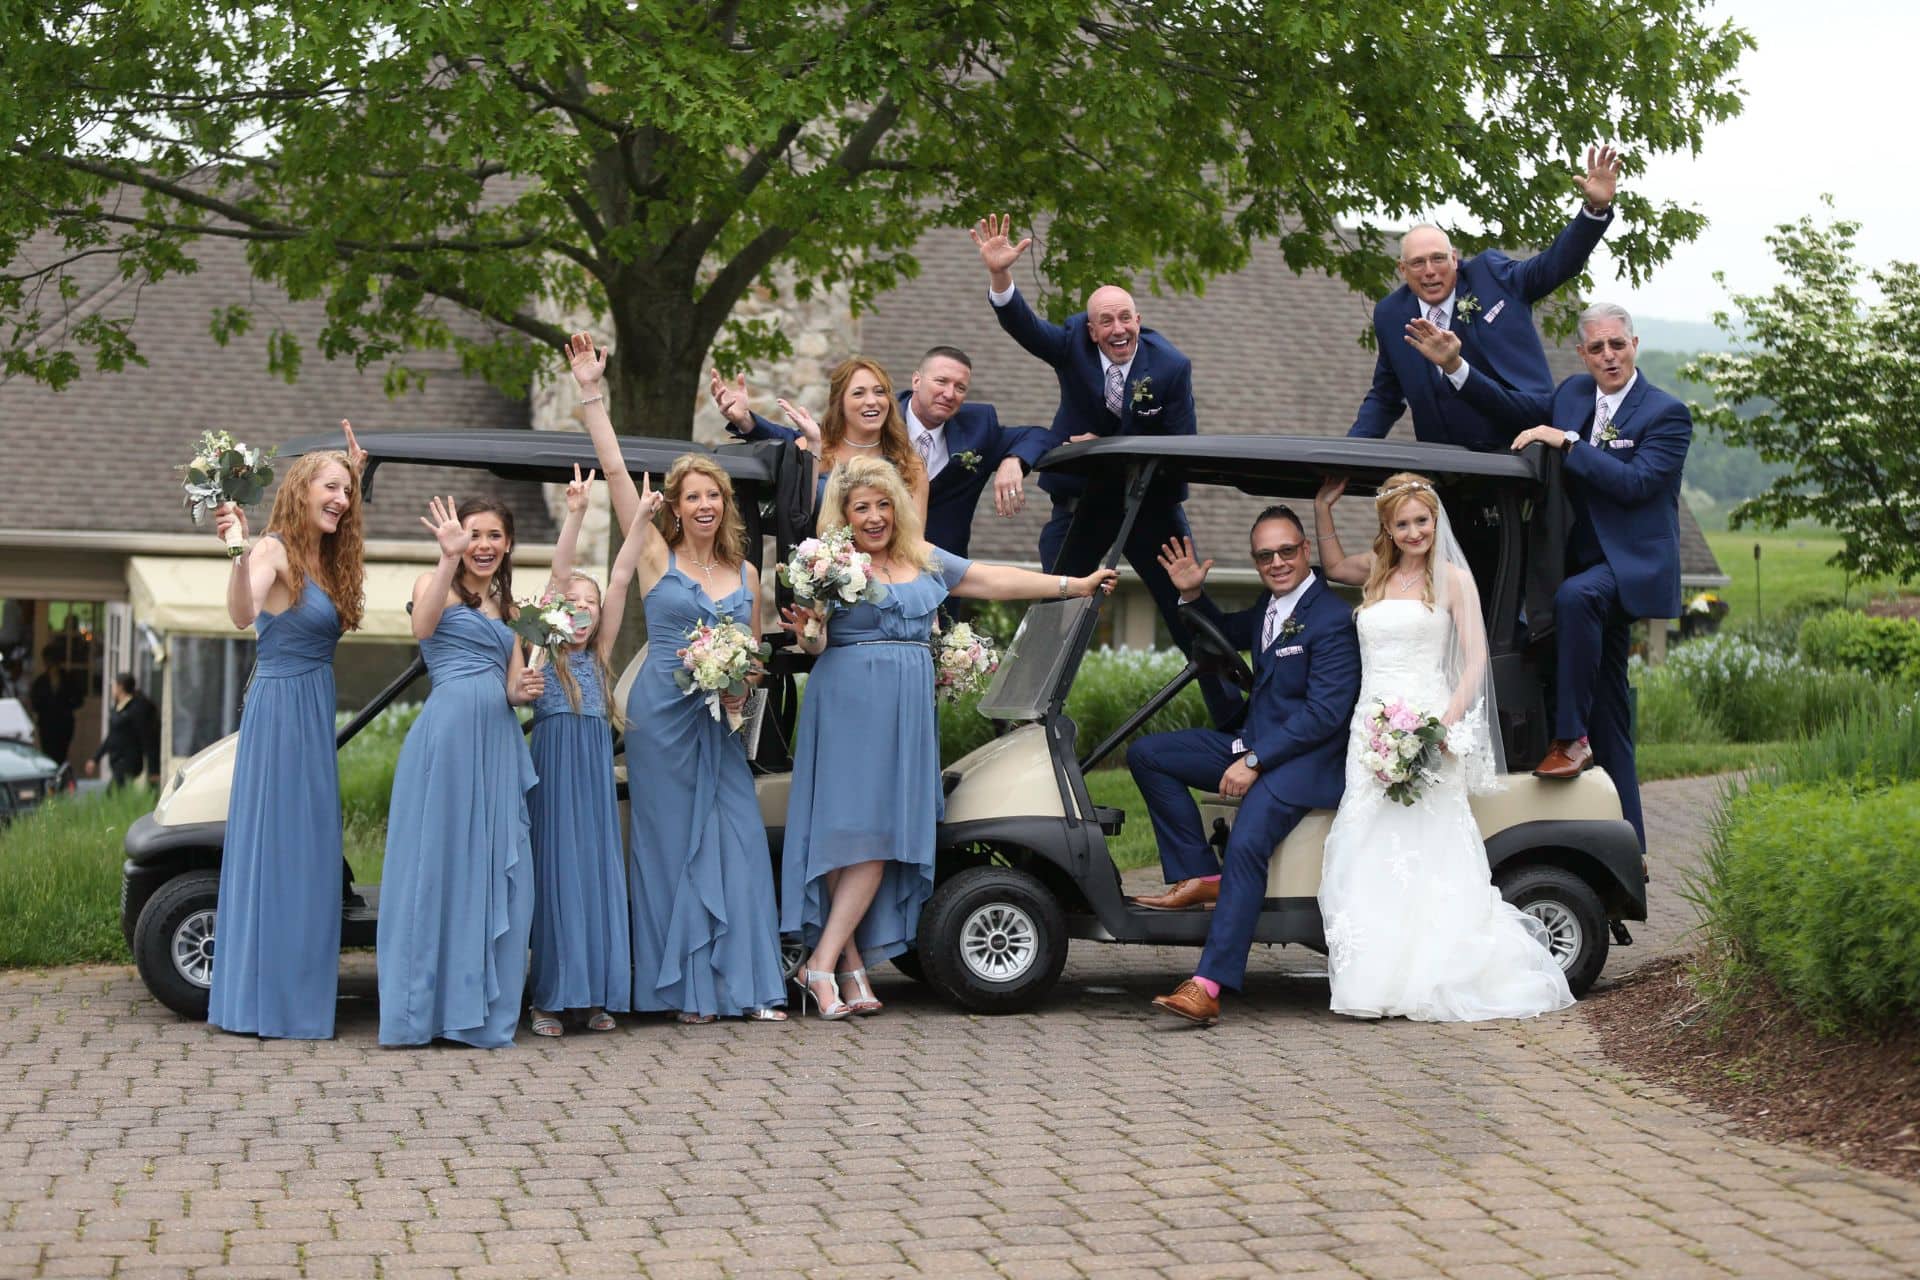 Wedding party smiling and celebrating and posing in front of a Golf cart at Country club